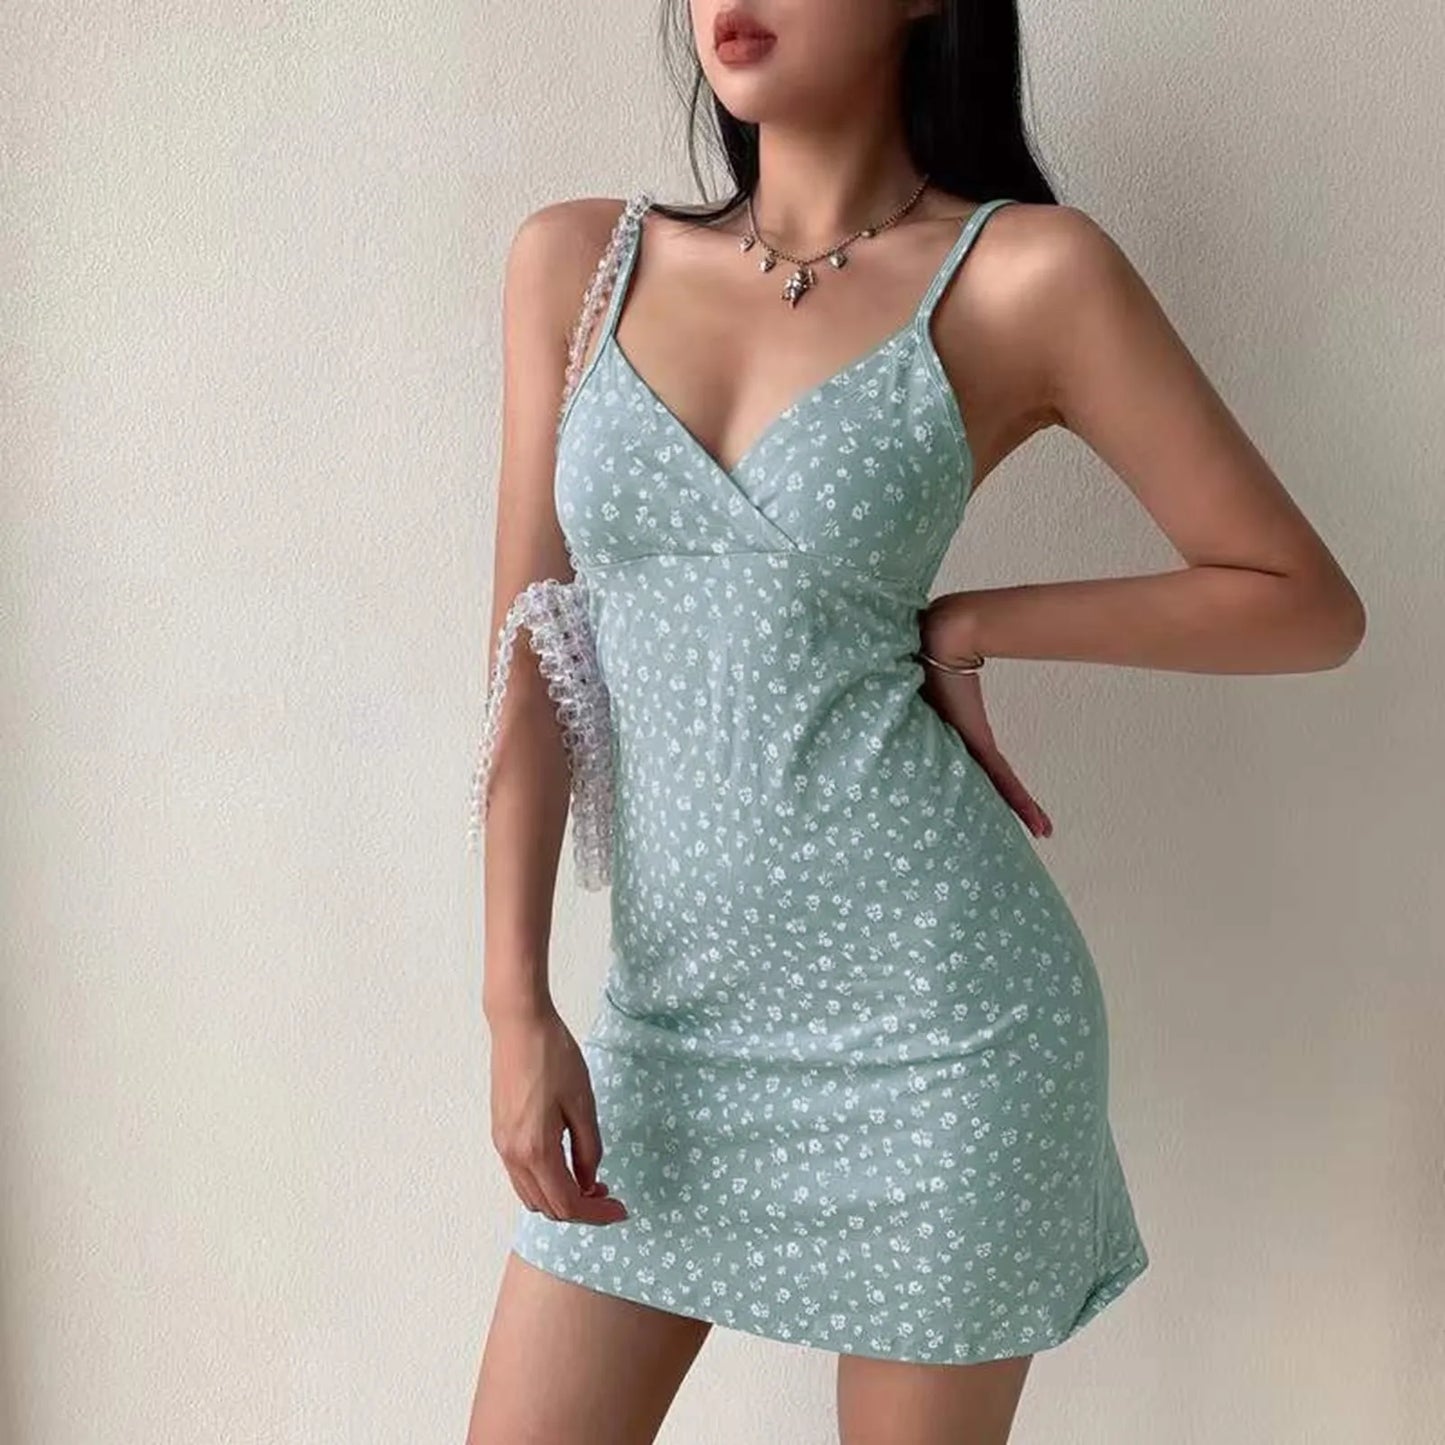 Y2k Vintage Floral Cross Camis Dress Women Slim Sleeveless V-Neck Summer Sexy Cute Backless Party Black Mini Dresses Woman Cloth